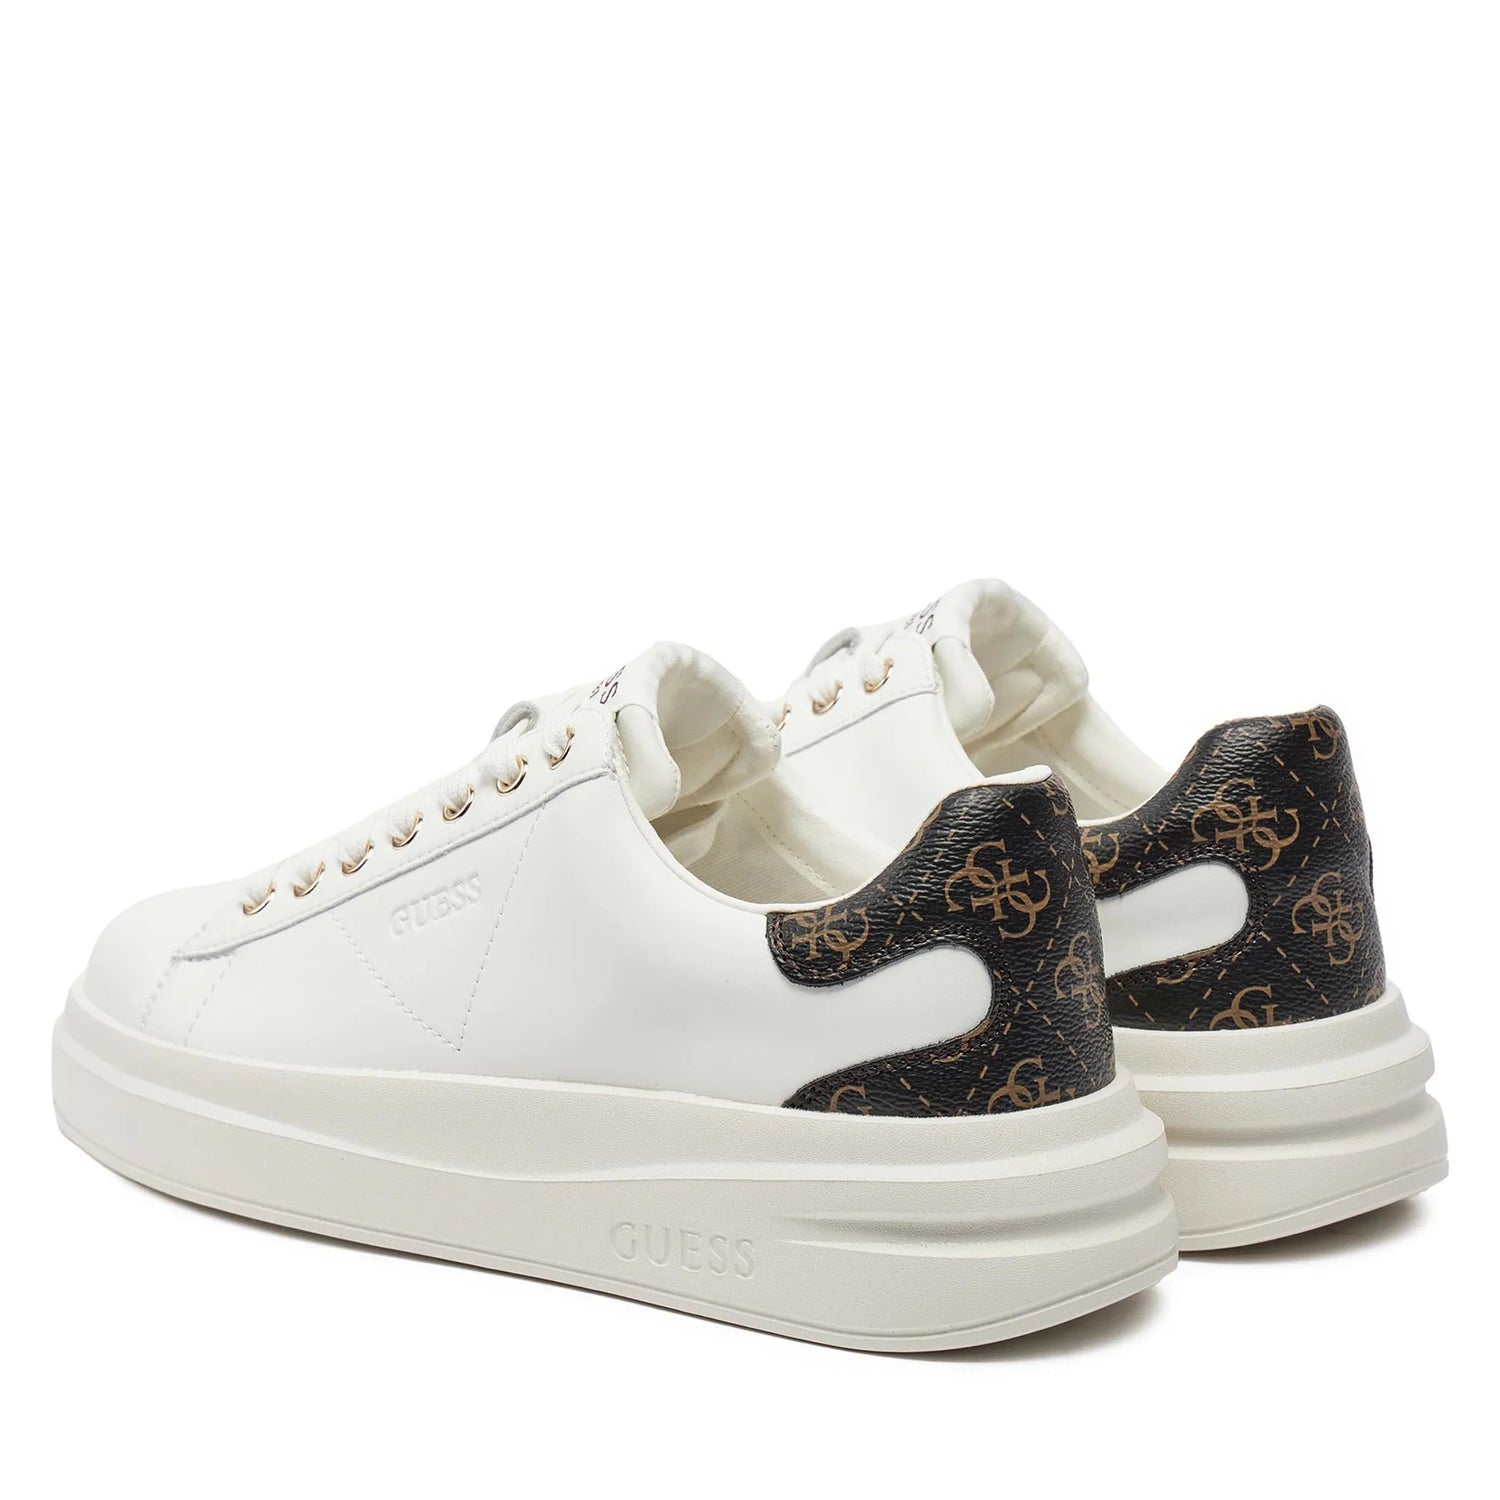 Guess Sapatilhas Sneakers Shoes Fljelb Whi Brown Branco Castanho_shot2